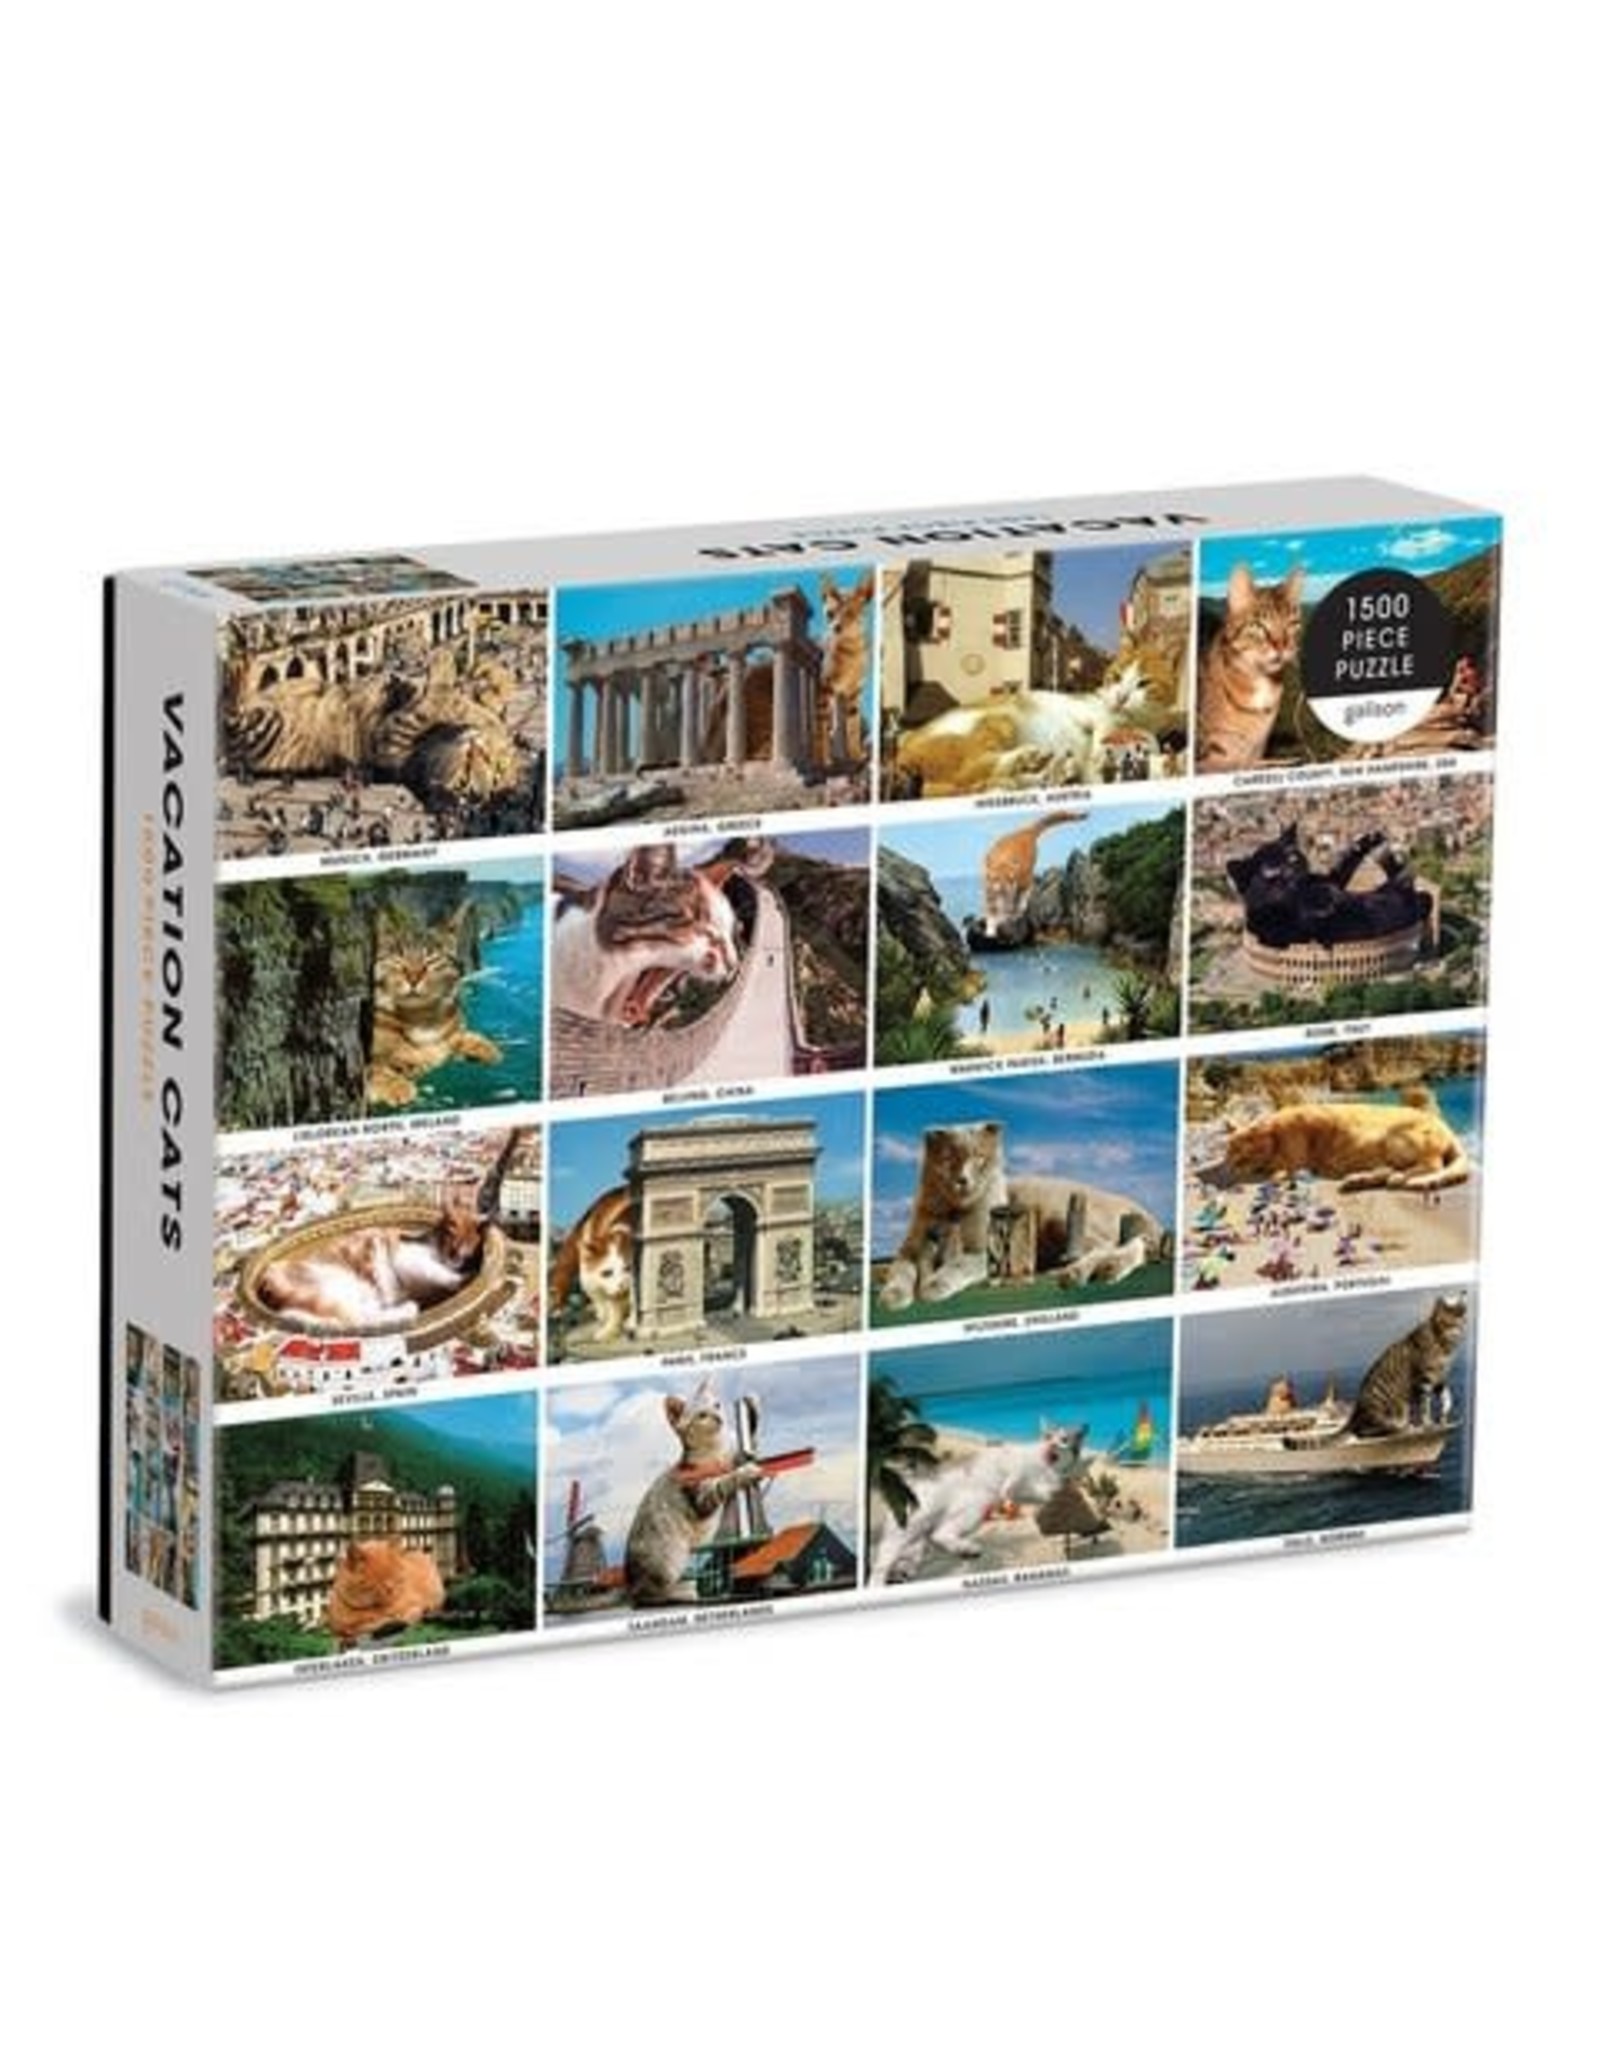 Vacation Cats 1500 Piece Puzzle